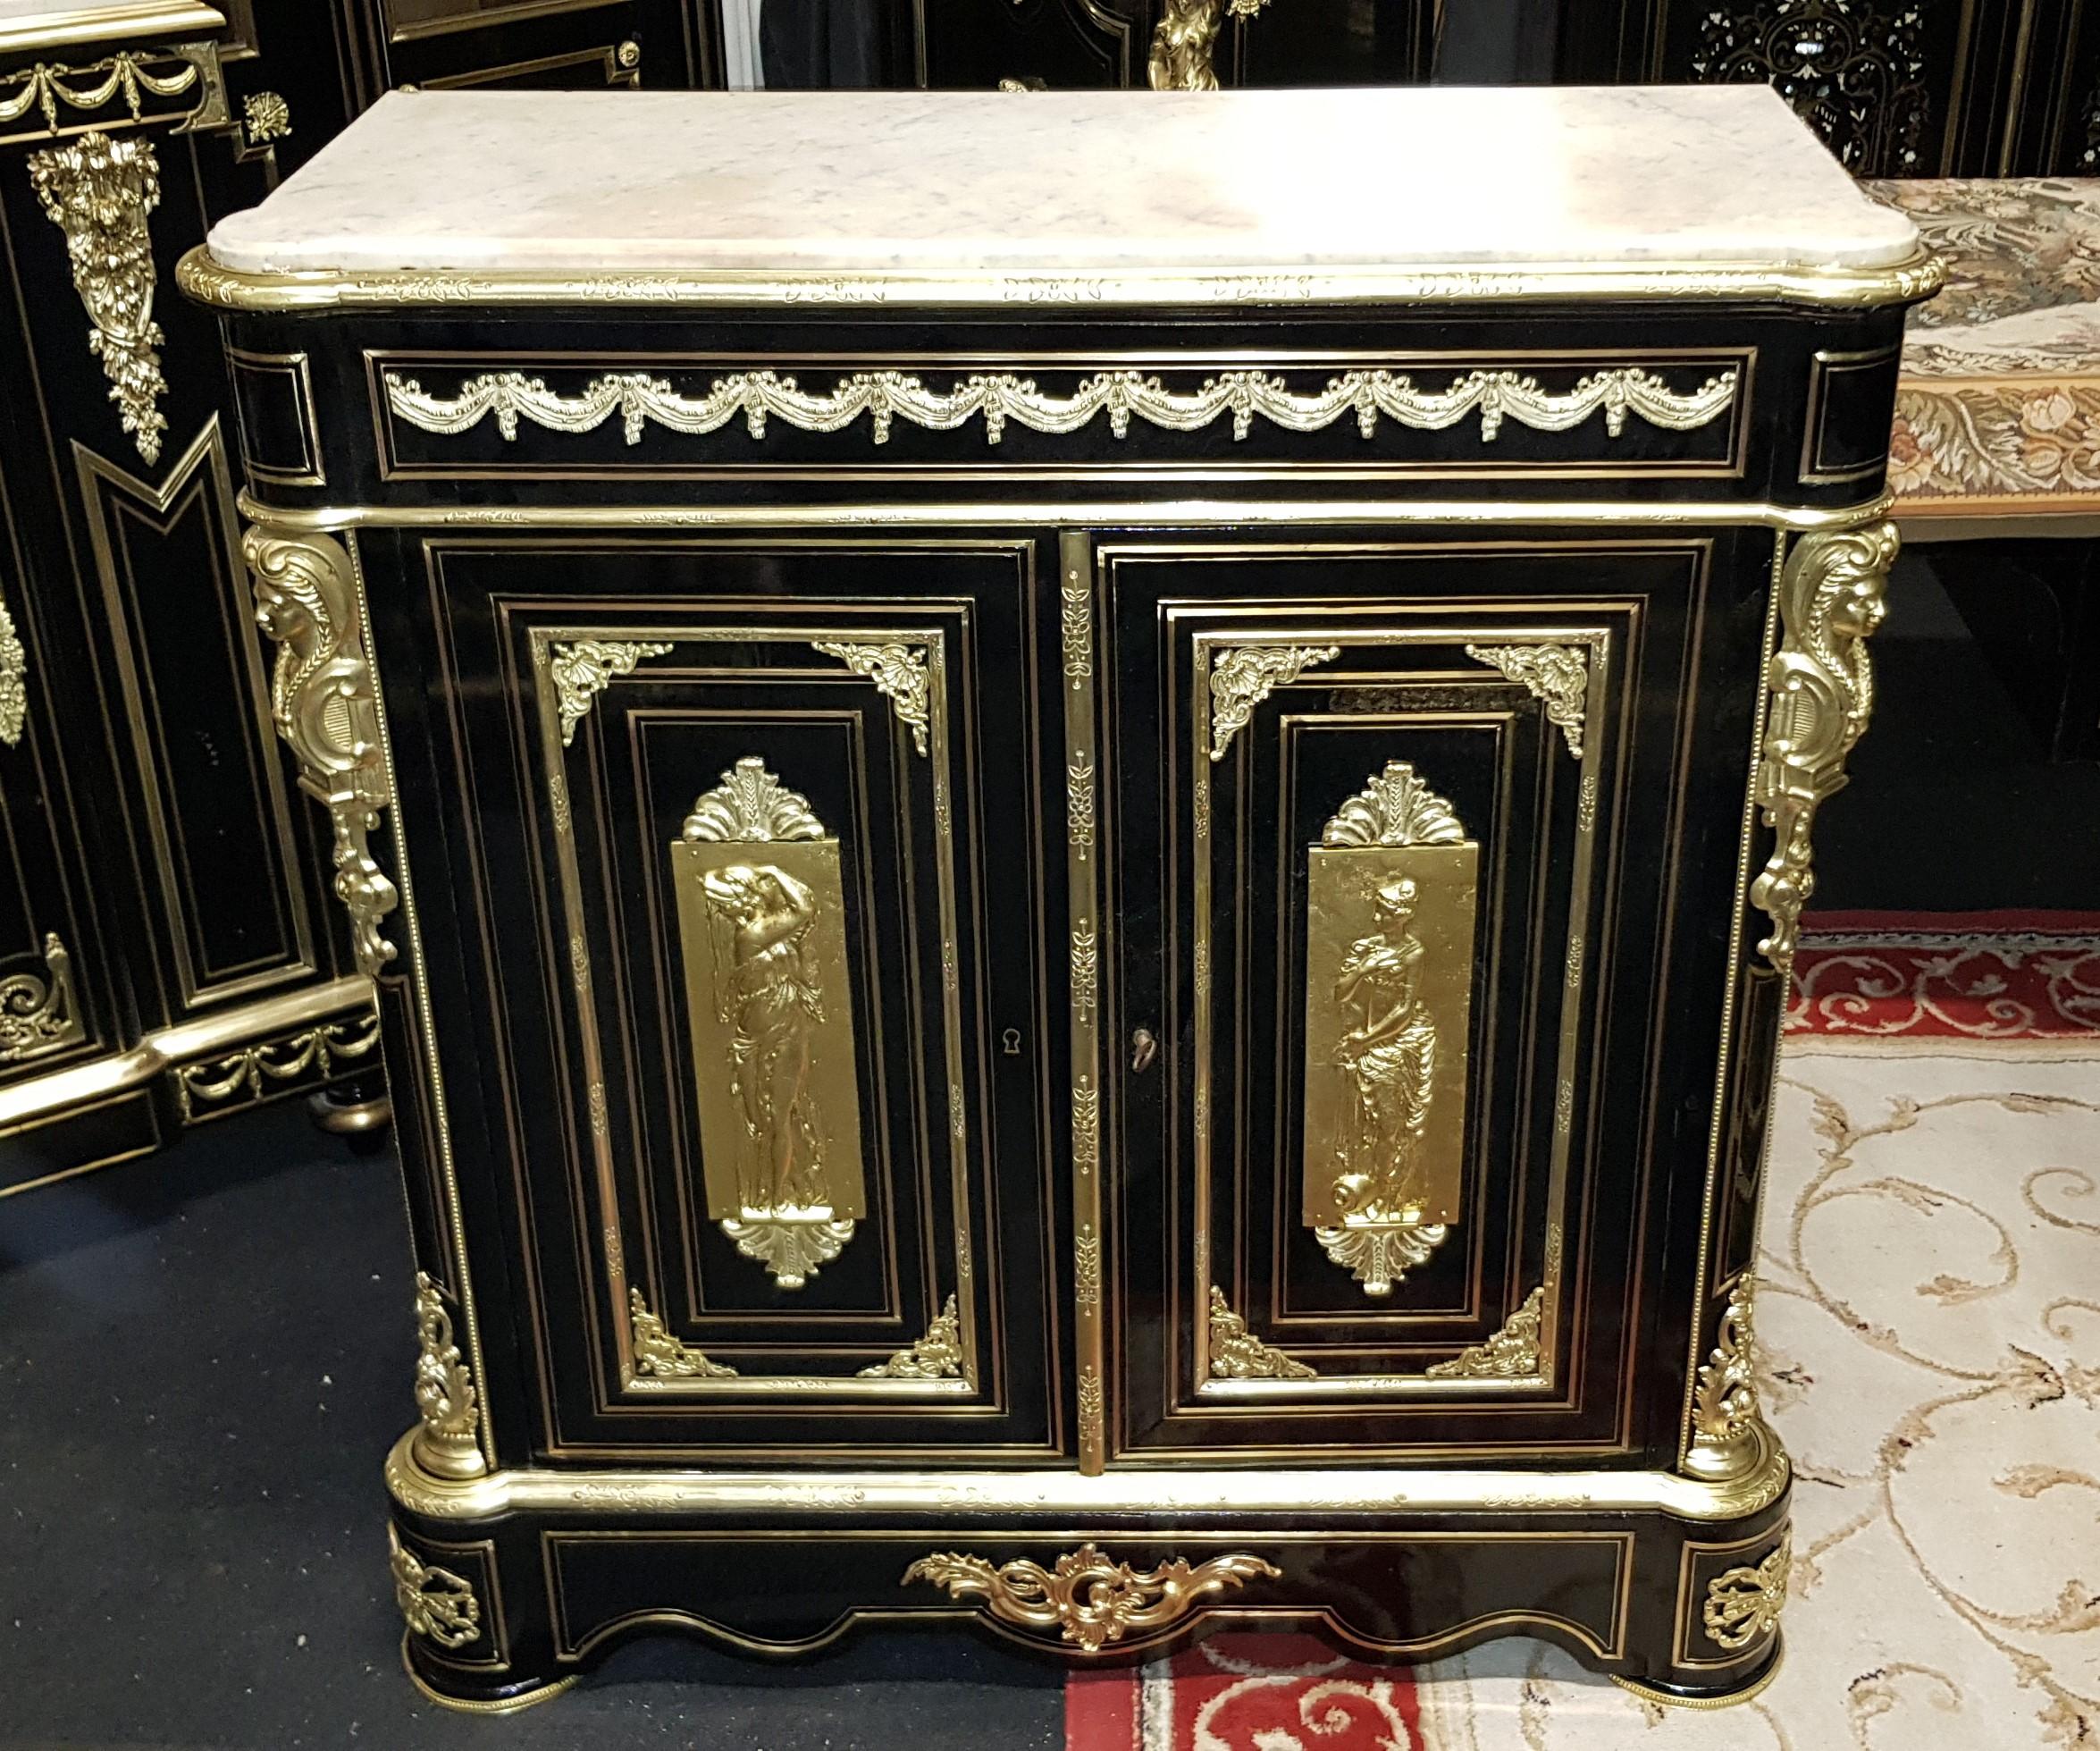 Napoleon III Boulle Marquetry and Carrara Marble Cabinet, France 19th Century (Französisch)